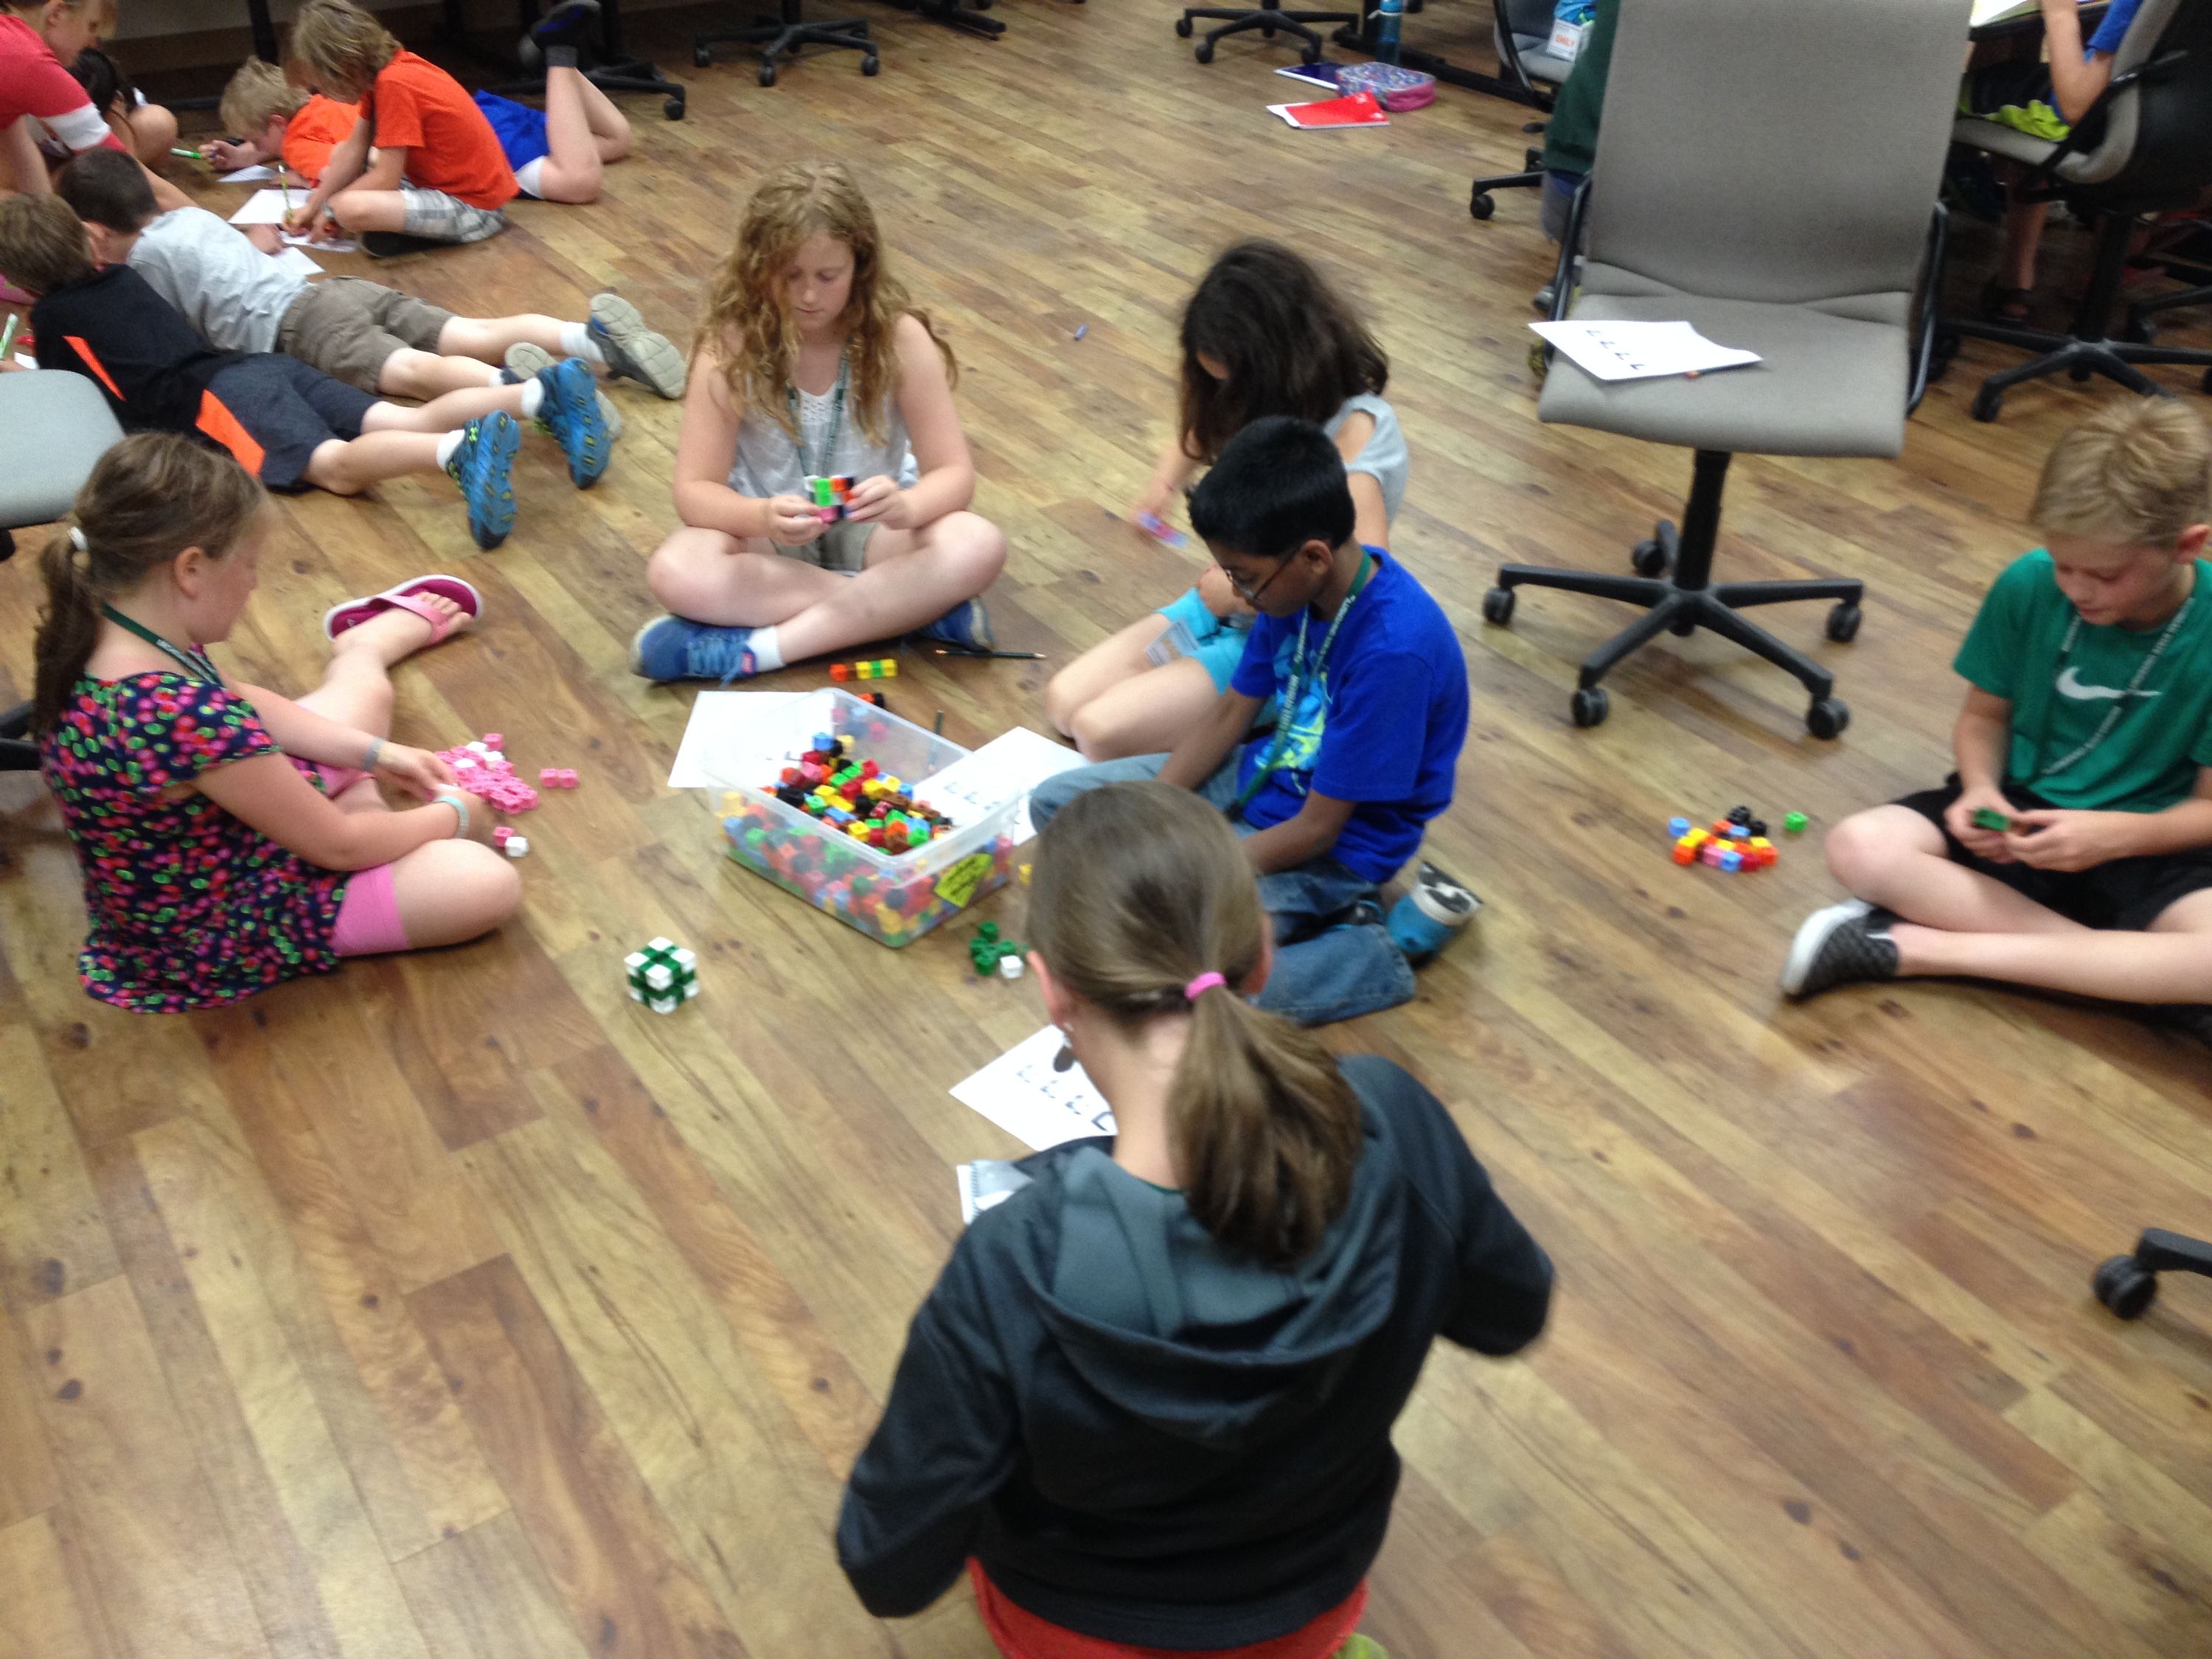 students sitting on the floor putting block pieces together